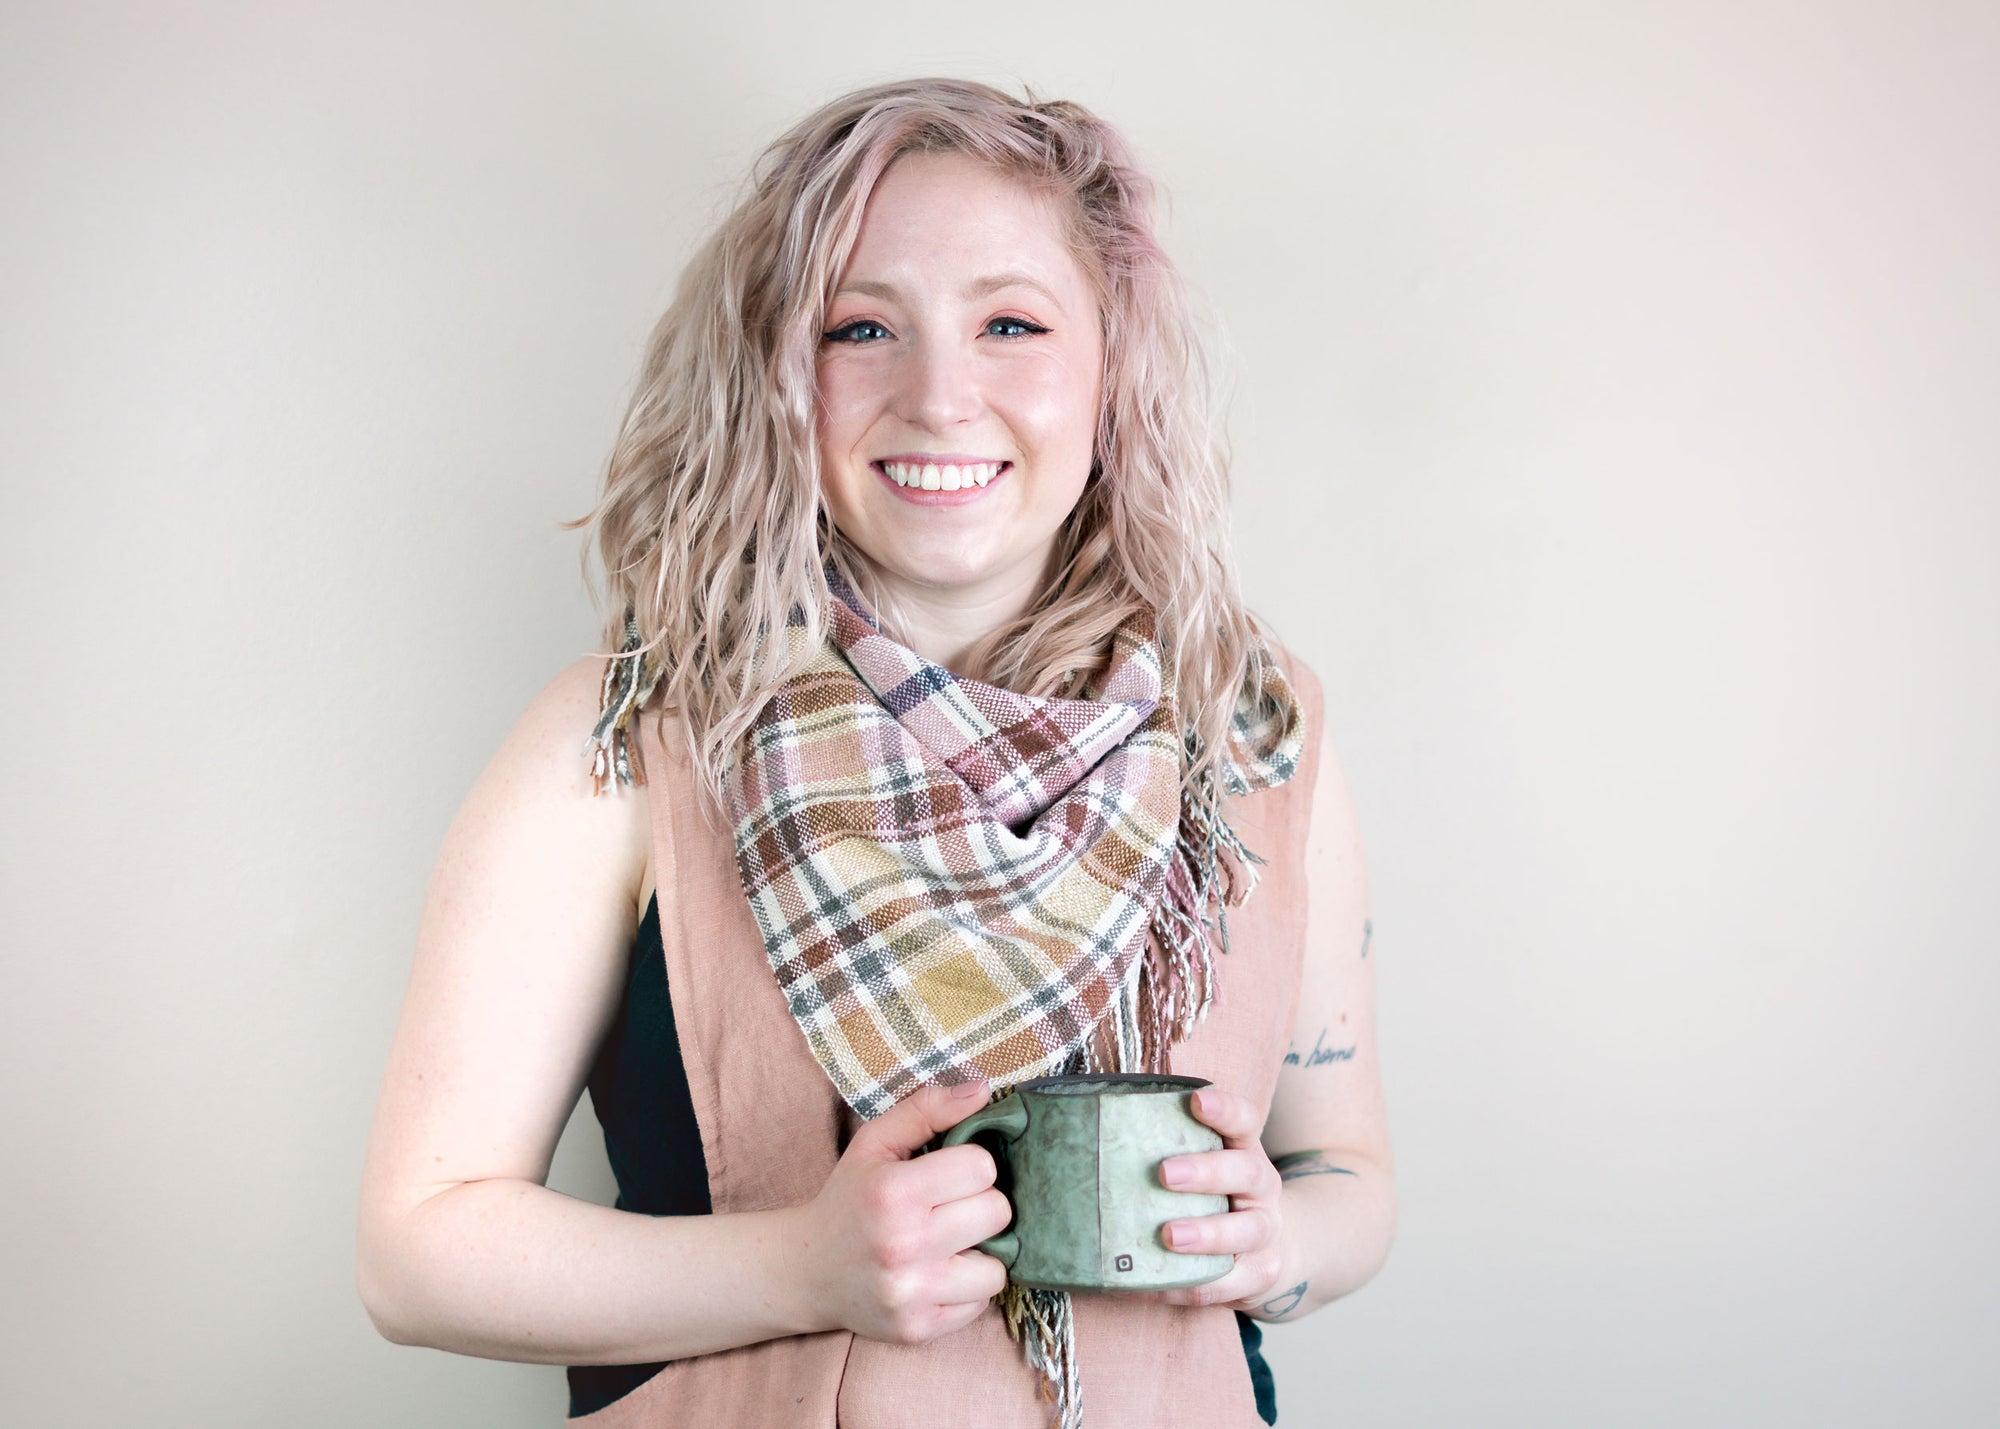 Creative strategist and web designer Emily Harrison of EHarrison Studio smiles at the camera while holding a coffee mug for dear life. She's wearing a handmade apron and scarf. Her hair is wavy and light pink, matching the colors in her scarf. 